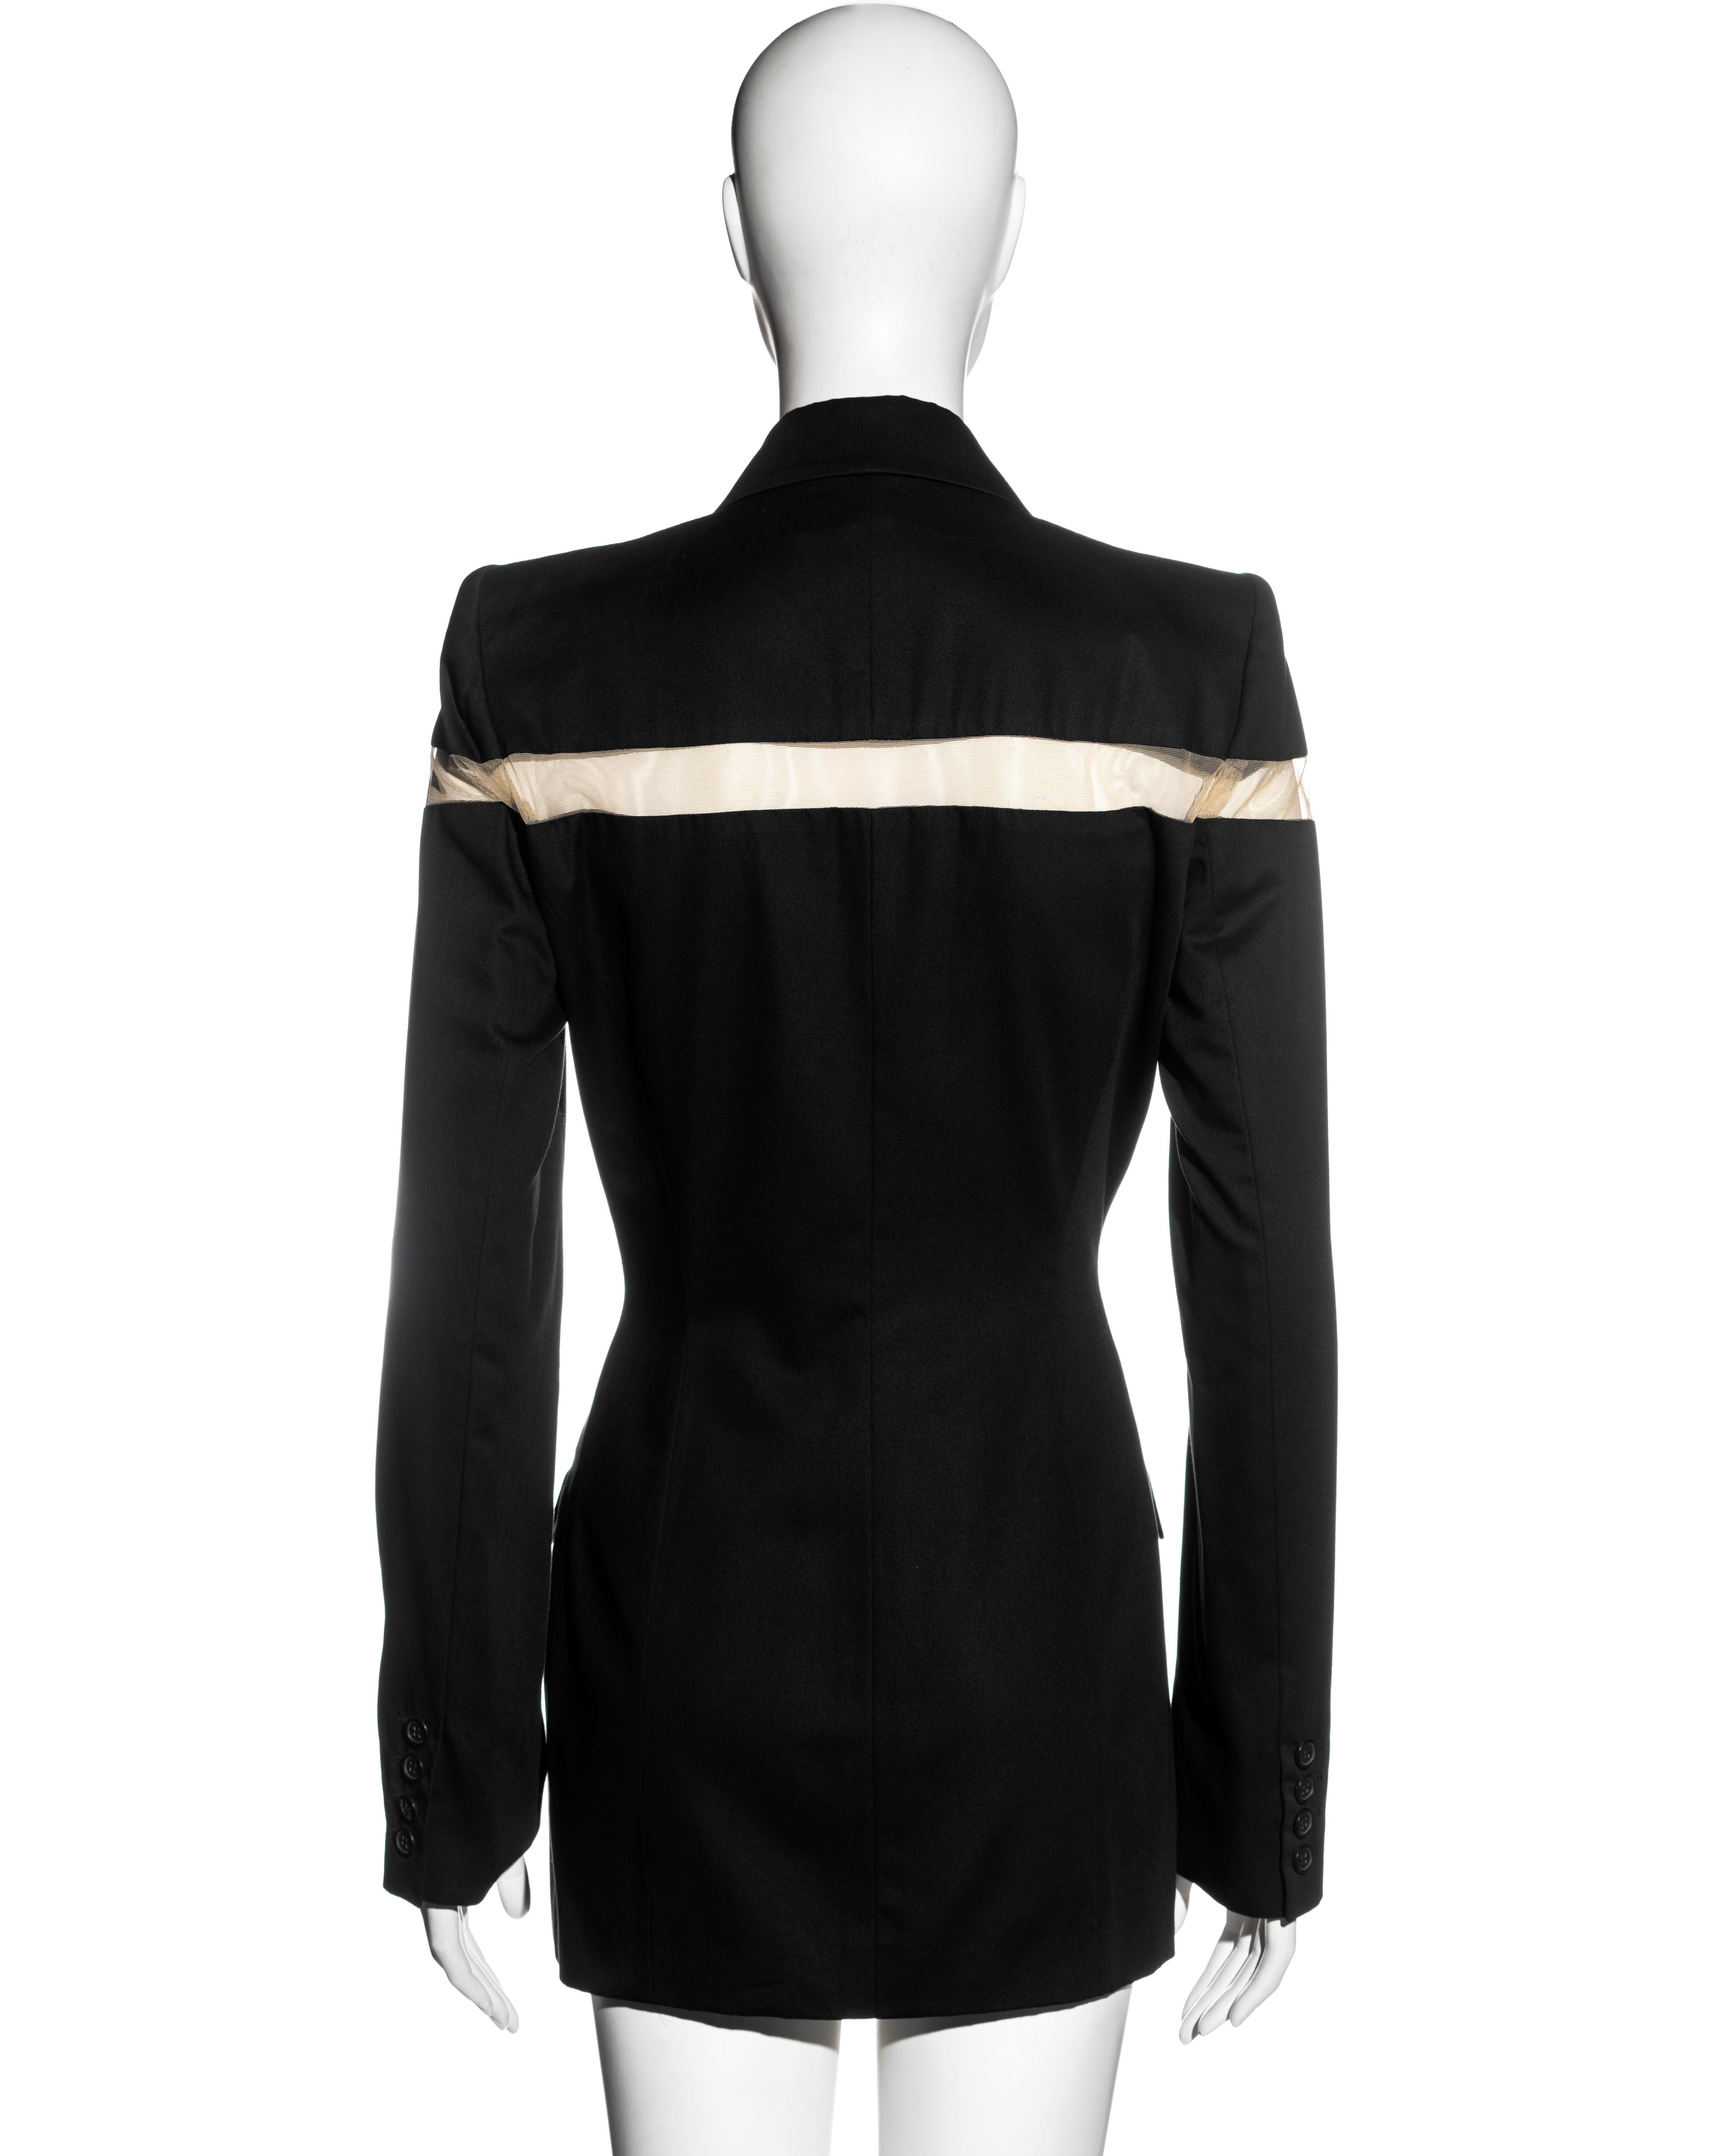 Alexander McQueen black double-breasted blazer mini dress with cut-out, ss 1998 For Sale 4